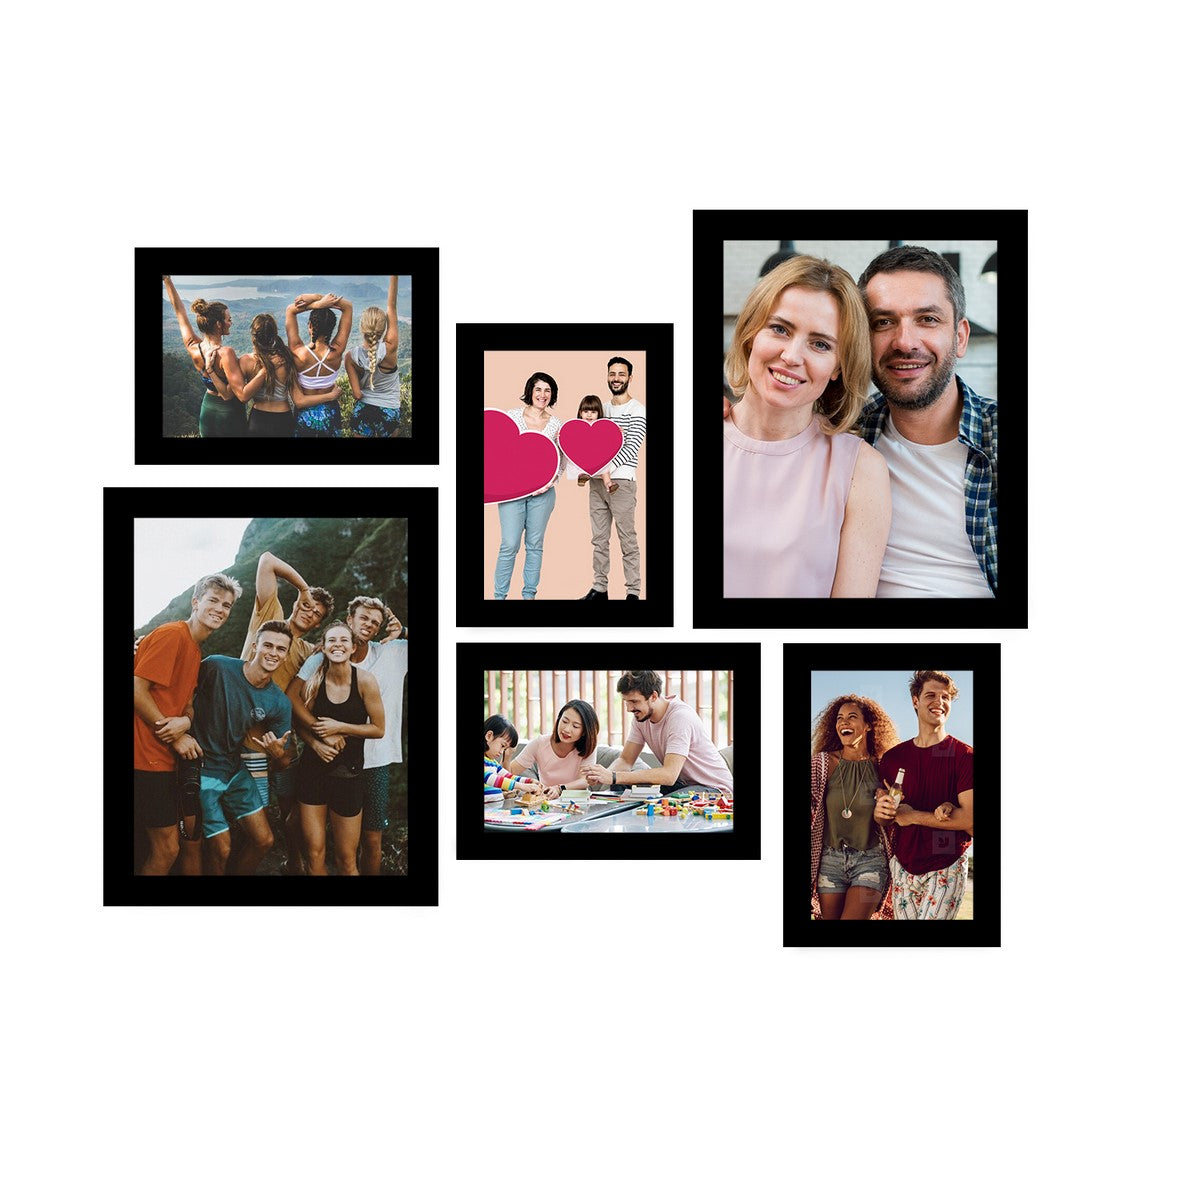 Memory Wall Collage Photo Frame - Set of 6 Photo Frames for 4 Photos of 5"x7", 2 Photos of 8"x10"